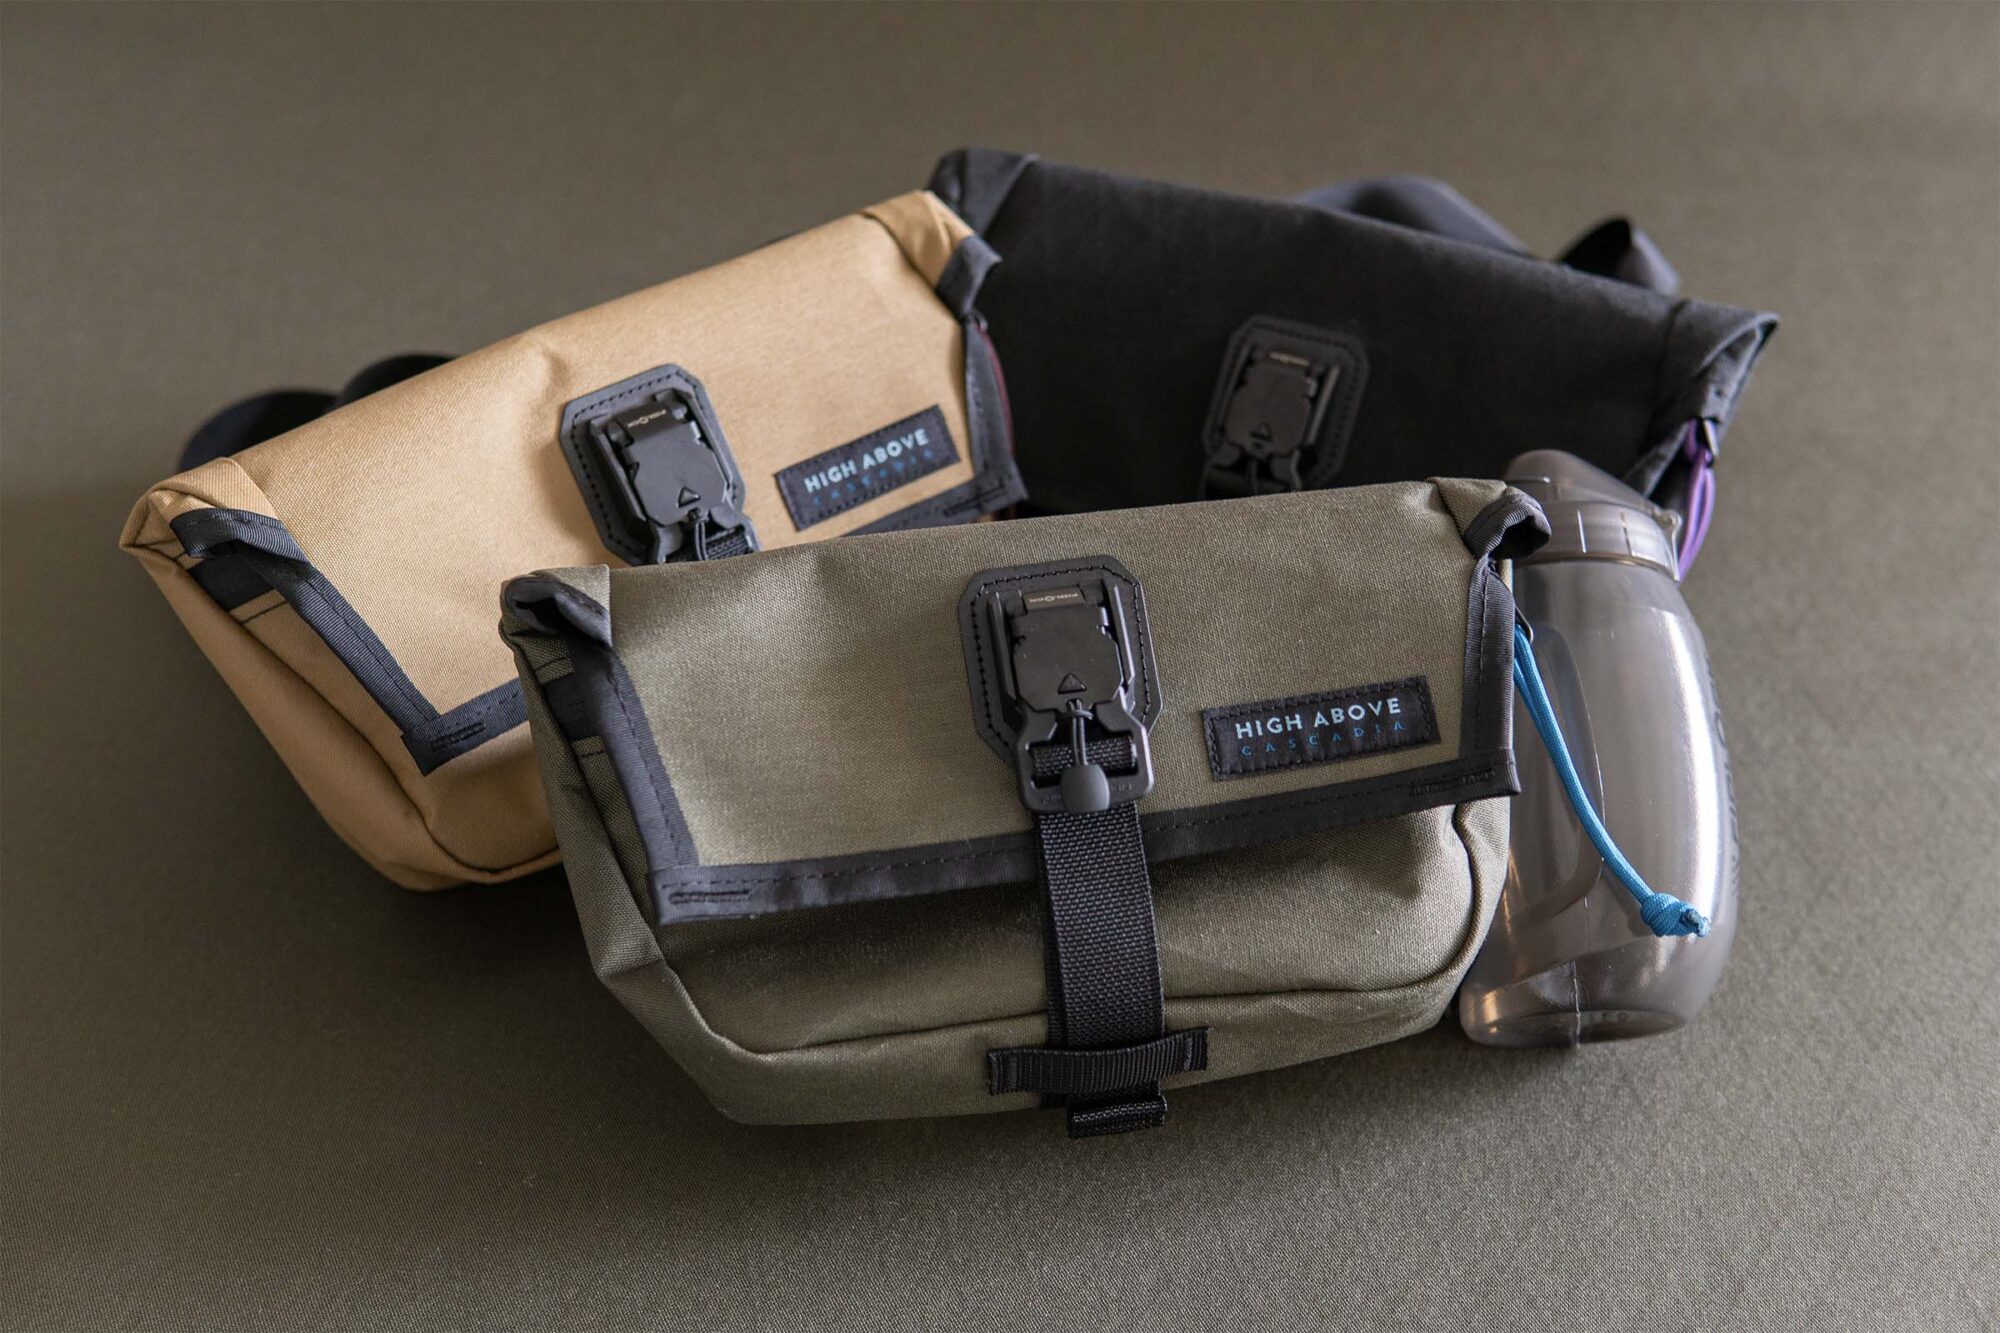 High above venture hip pack